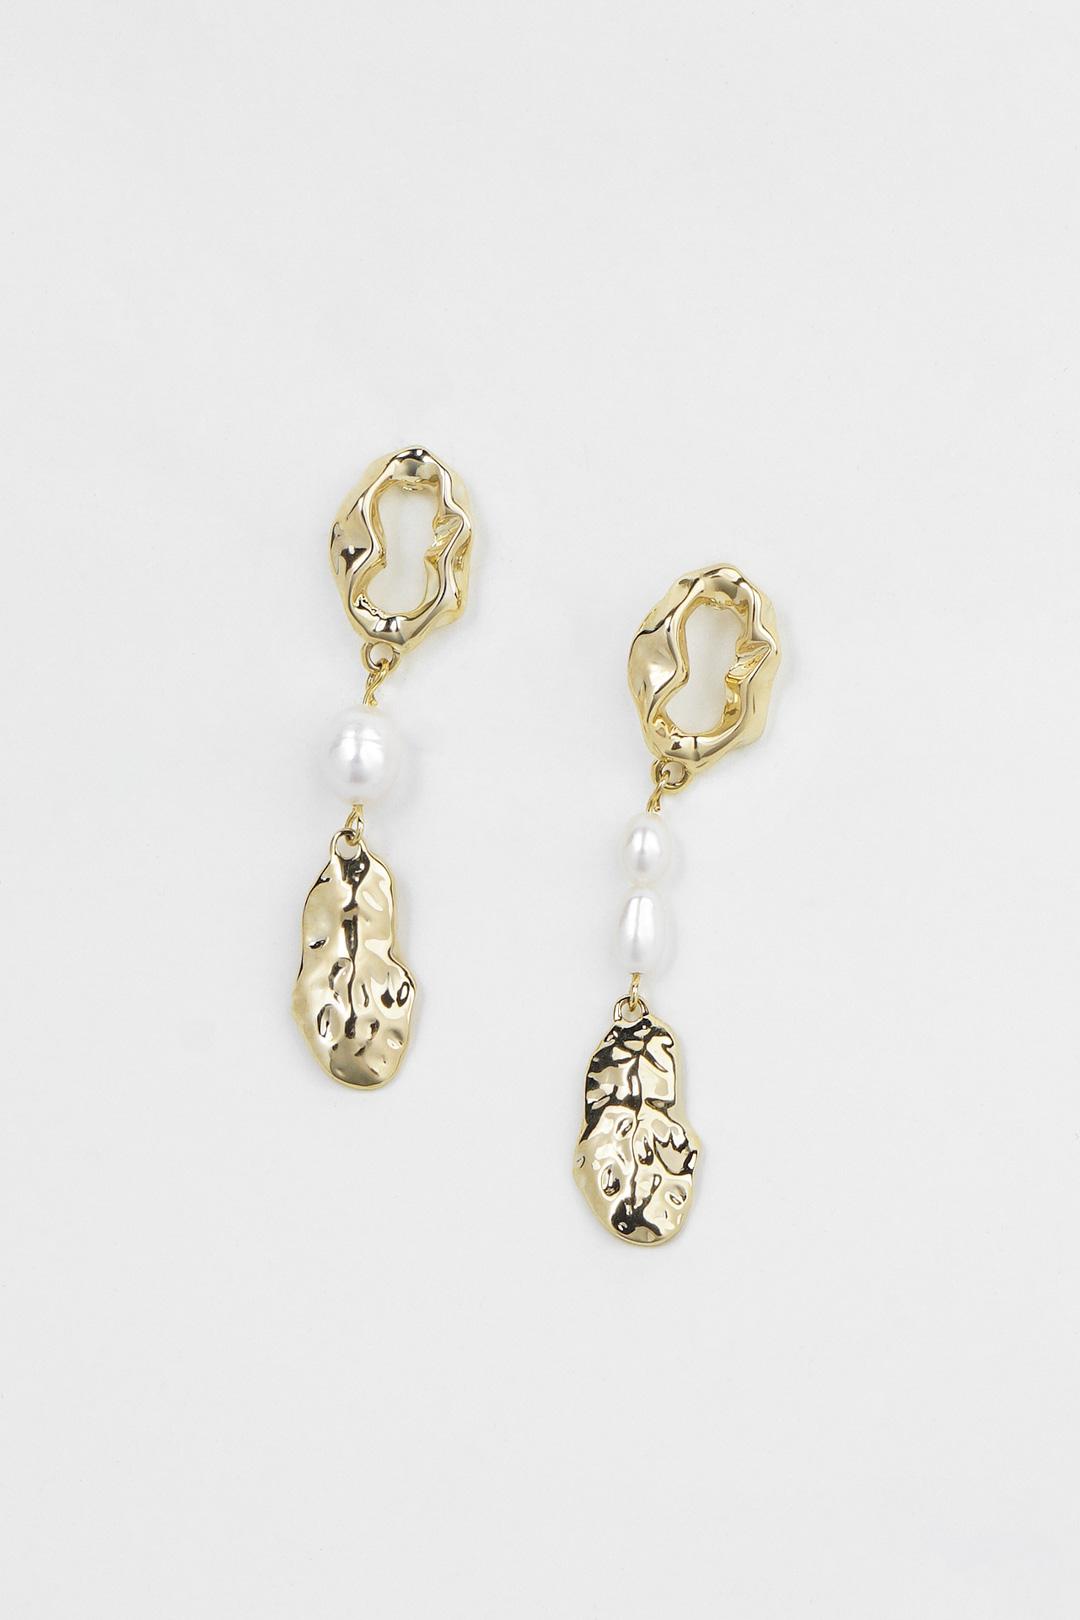 Hoop Earrings With Drop Pearl And Gold Charms